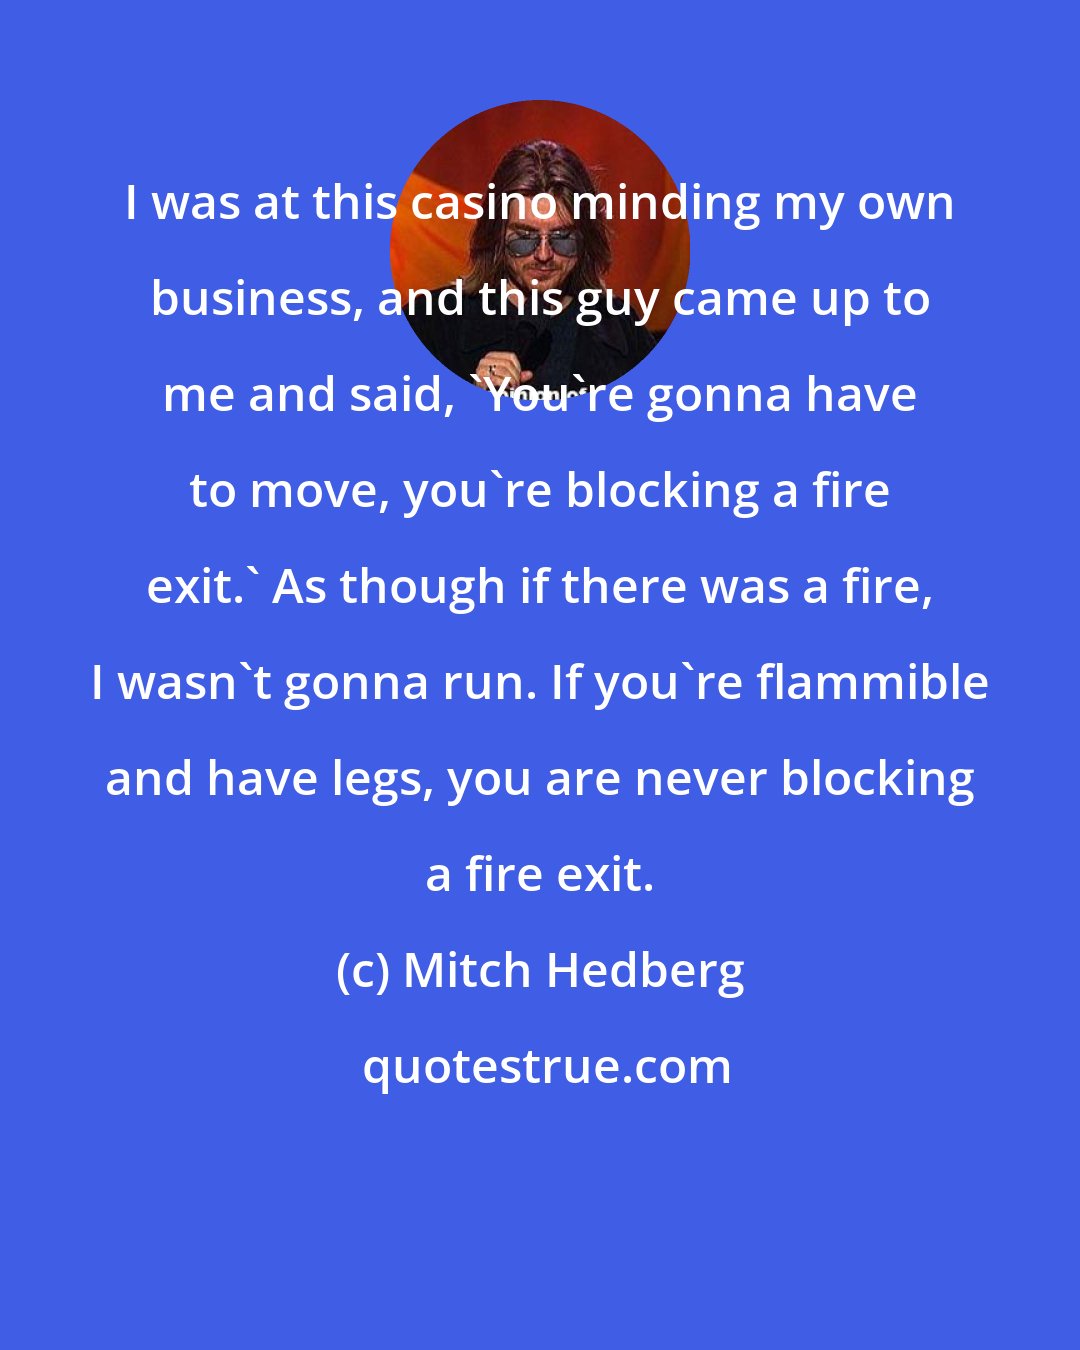 Mitch Hedberg: I was at this casino minding my own business, and this guy came up to me and said, 'You're gonna have to move, you're blocking a fire exit.' As though if there was a fire, I wasn't gonna run. If you're flammible and have legs, you are never blocking a fire exit.